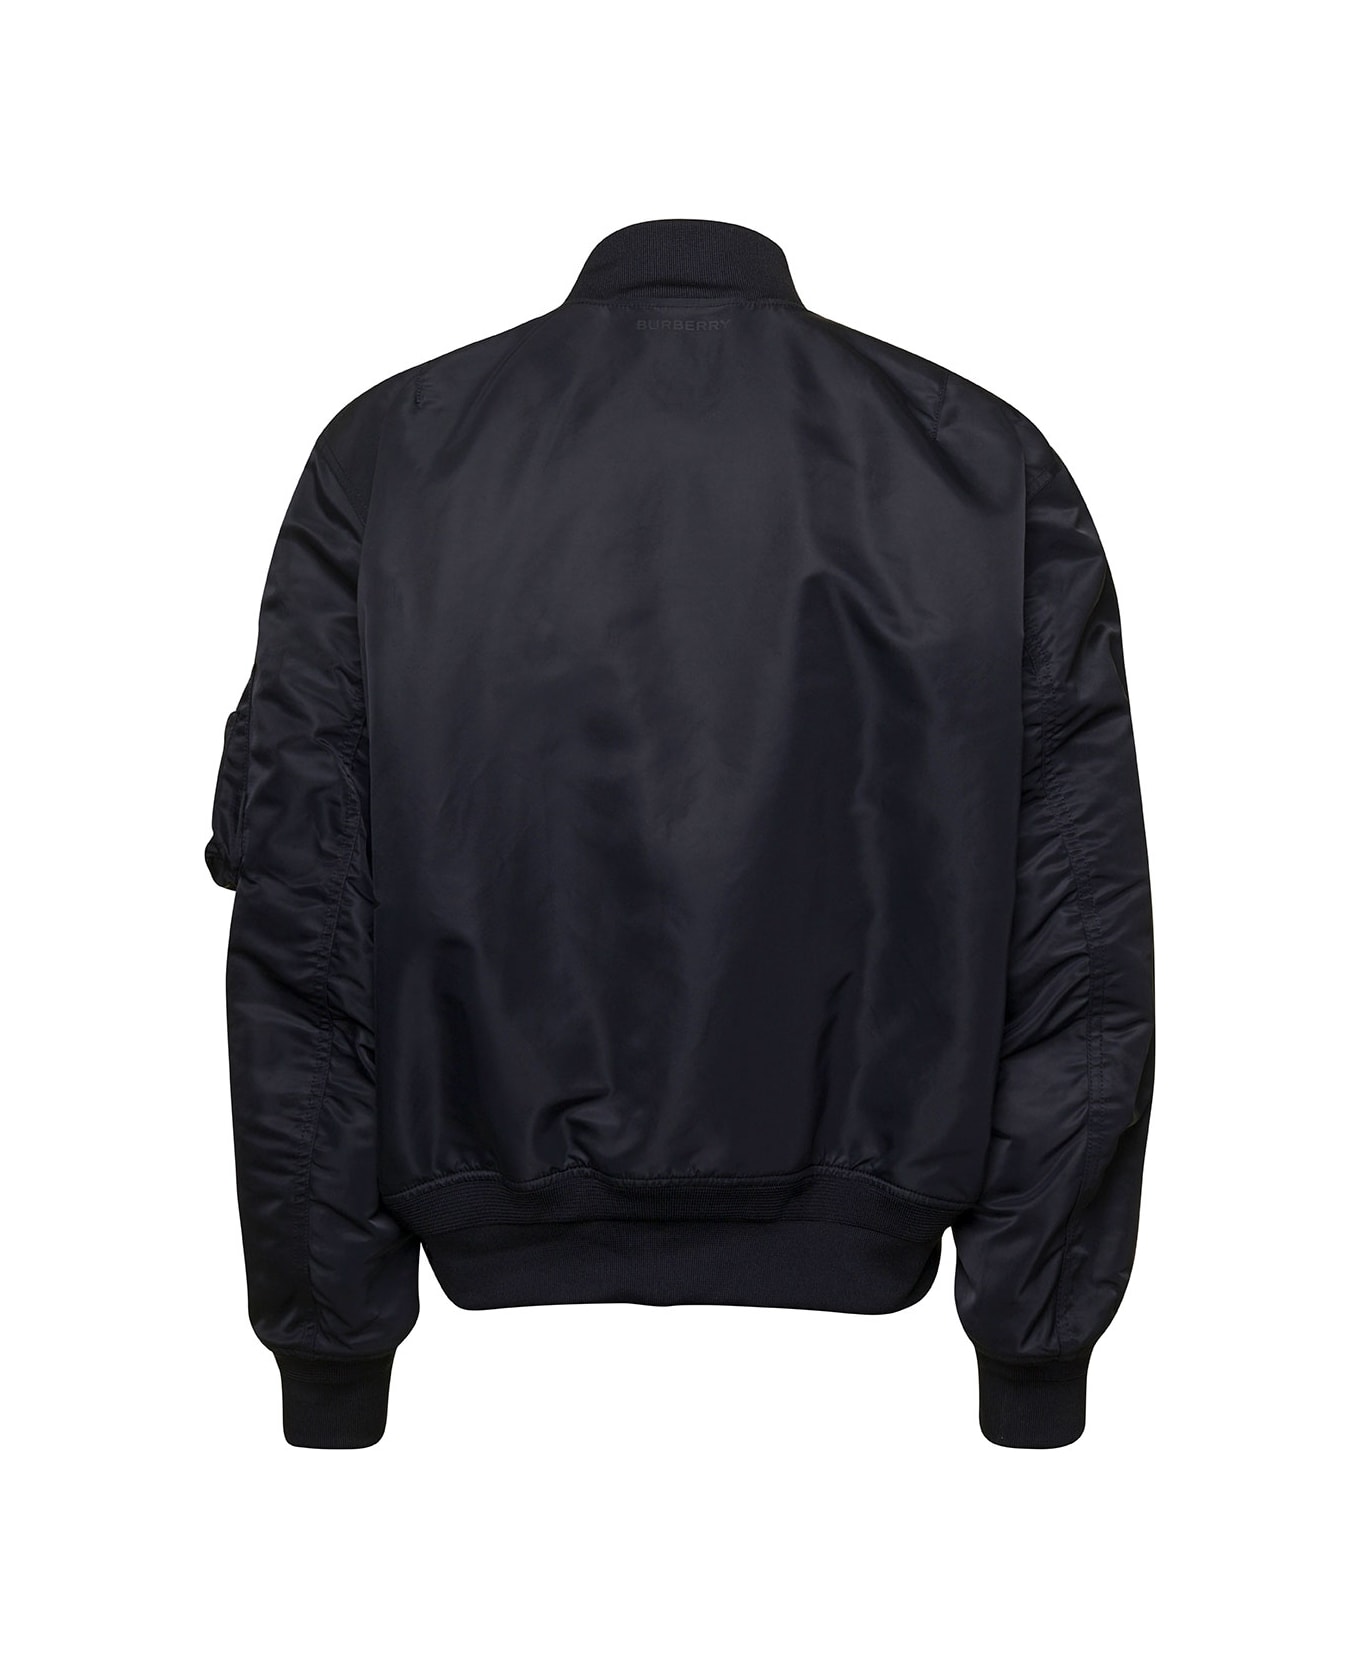 Burberry Black Bomber Jacket With Equestrian Knight Print In Polyamide Stretch Man - Black ジャケット